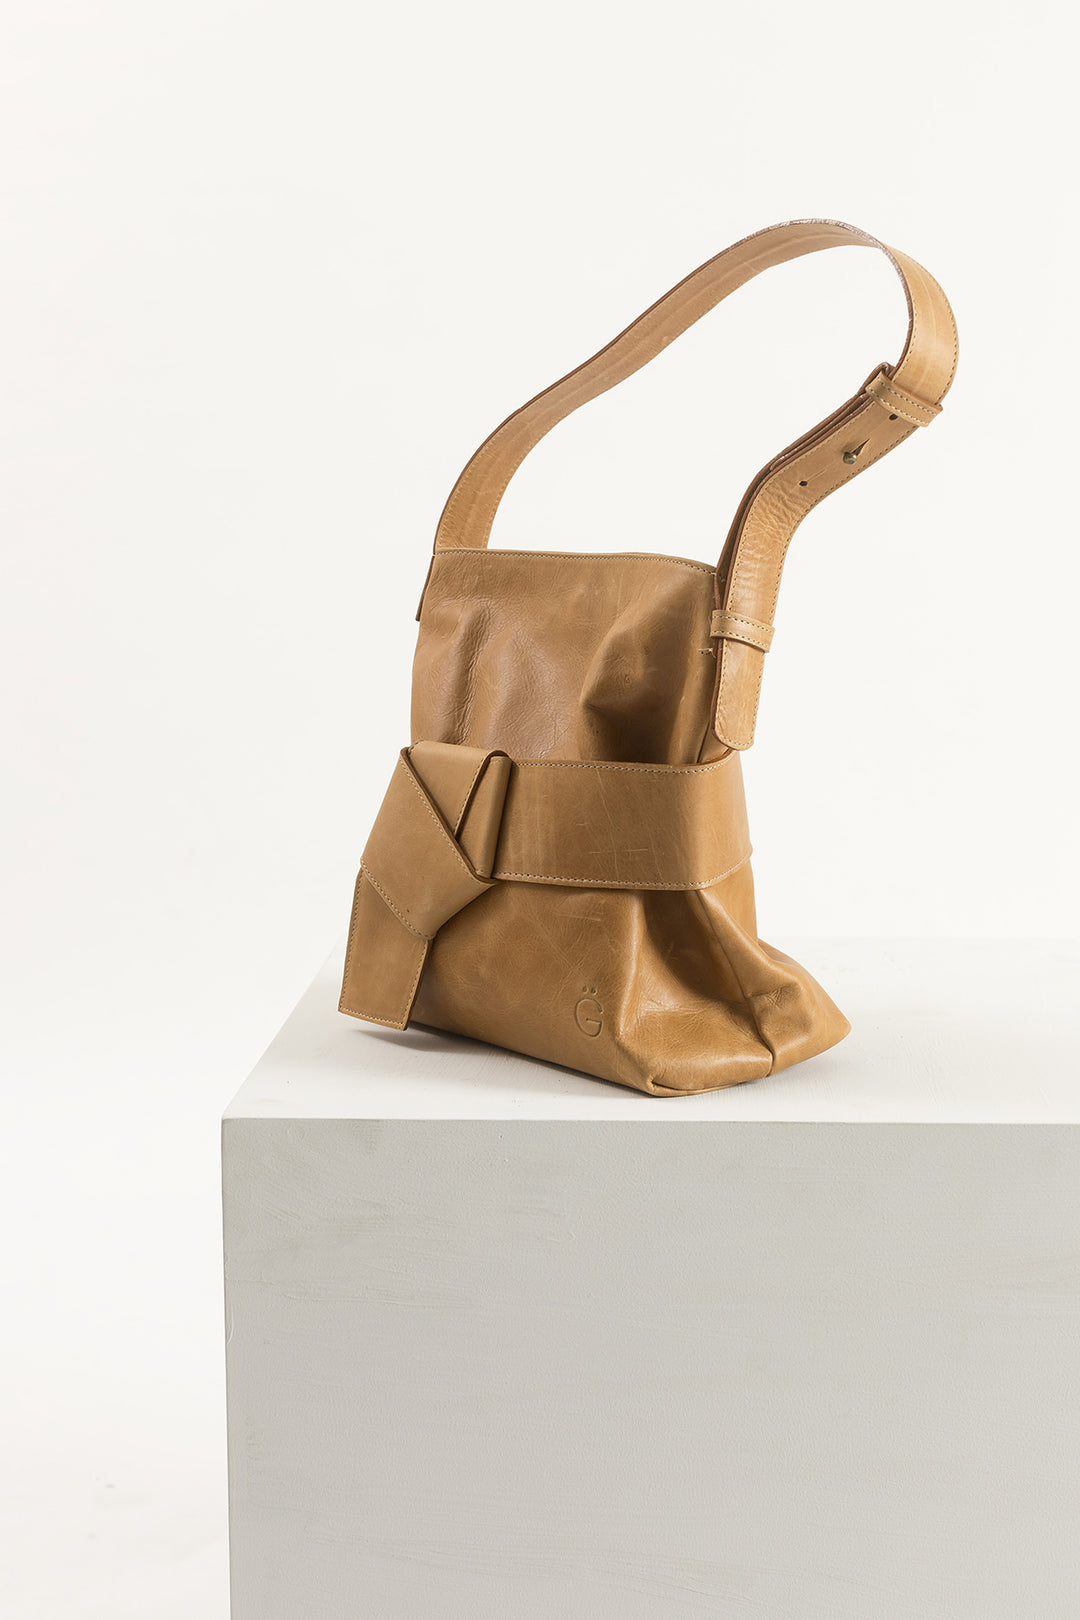 Hand Matters. Caramel Leather Purse. Accessories